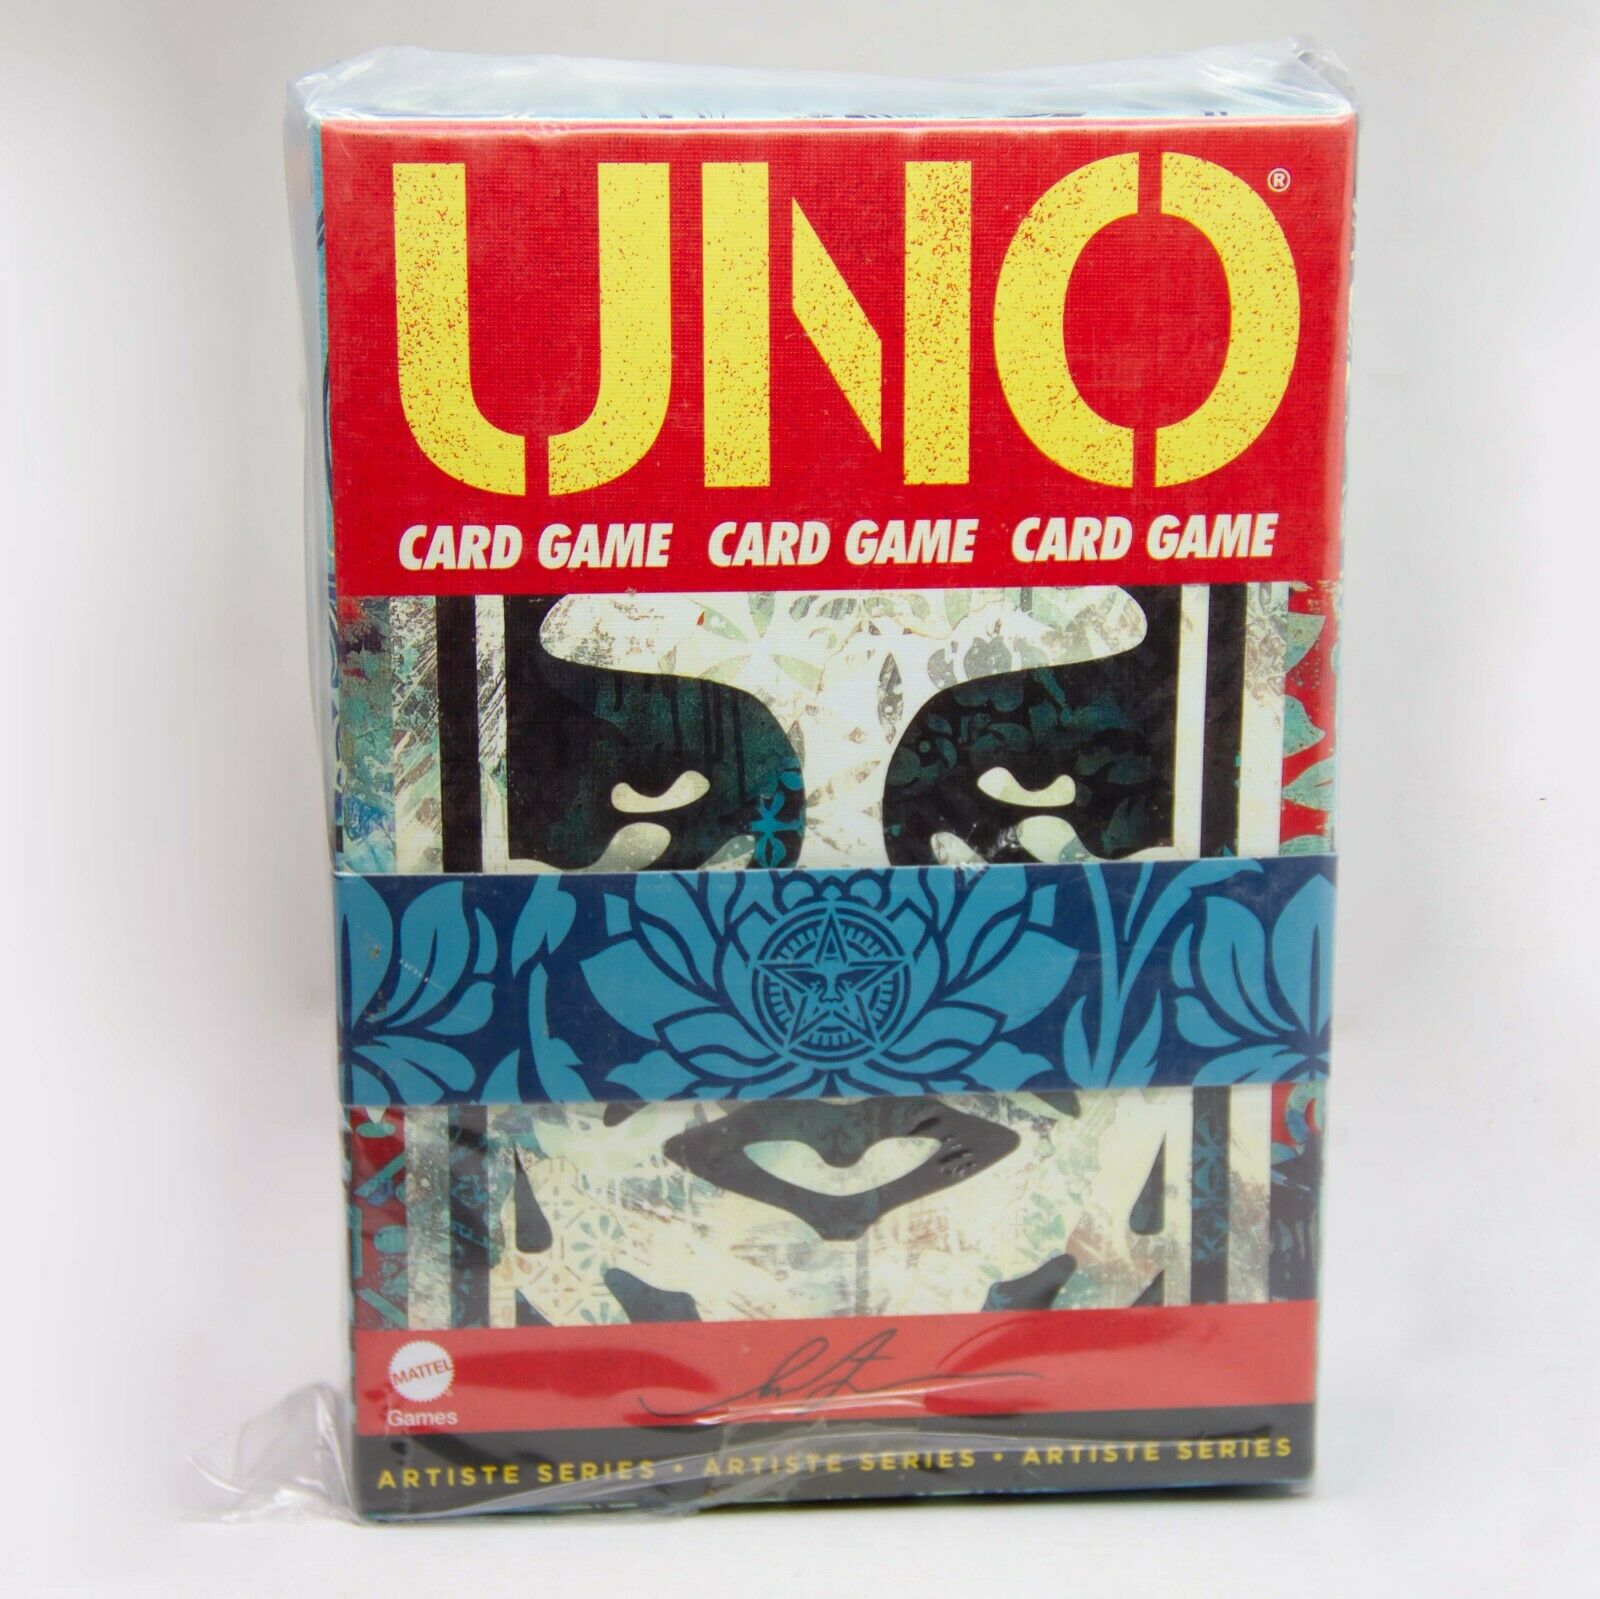 Obey Uno Playing Cards Deck Shepard Fairey Artiste Series - Free Shipping